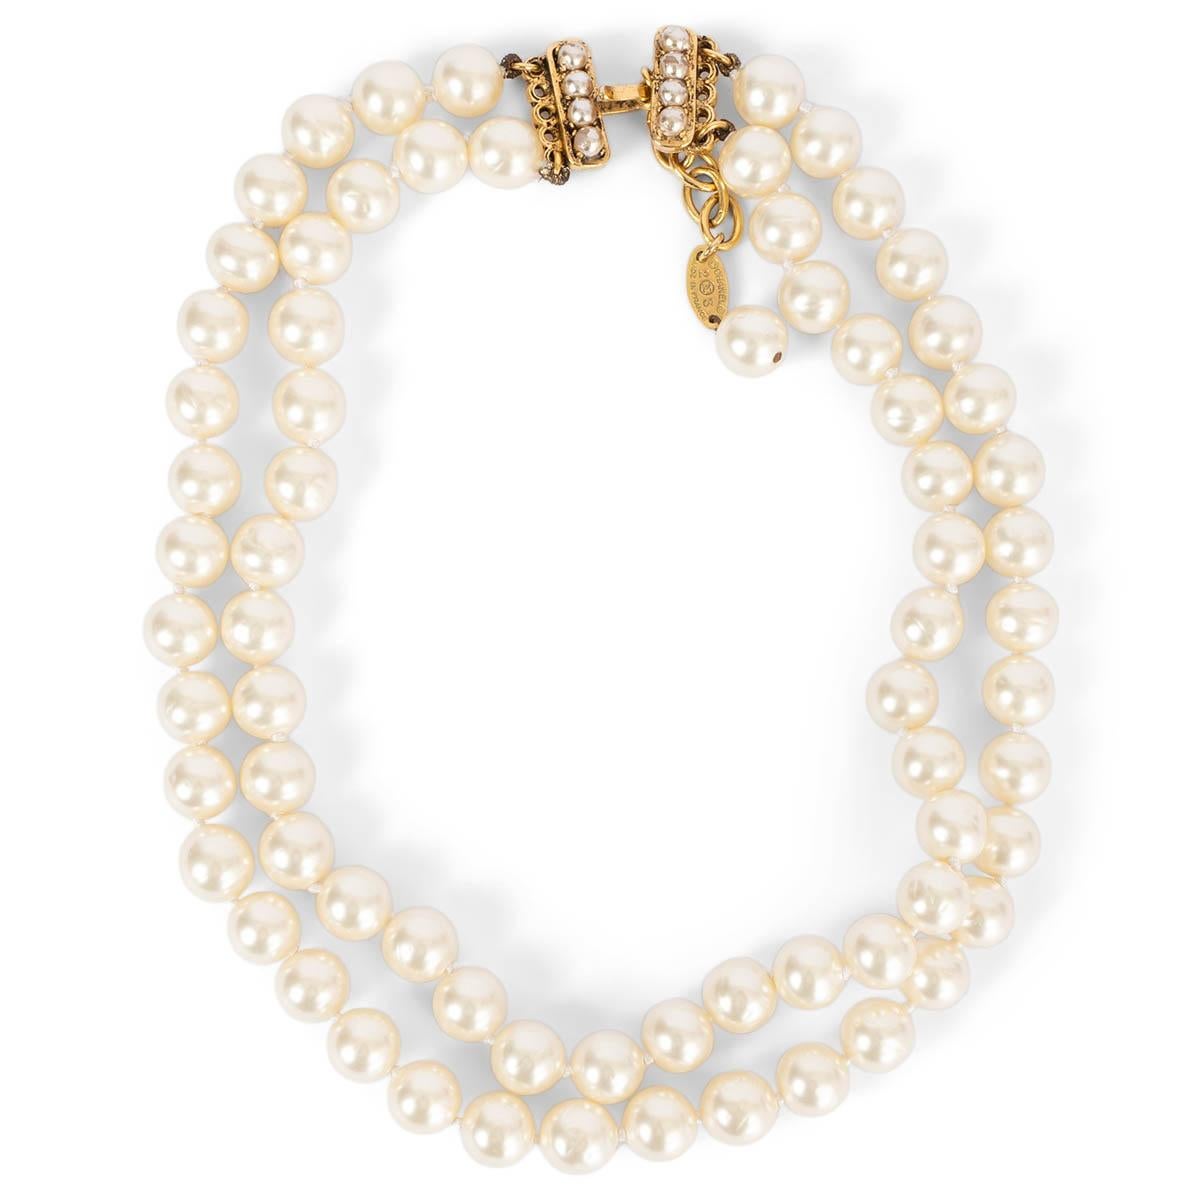 100% authentic Chanel vintage double tour faux pearl necklace with gold-tone hook closure. Has been worn and shows some wear to the small pearls on the closure. Overall in excellent condition.

Measurements
Width	2.7cm (1.1in)
Length	36cm